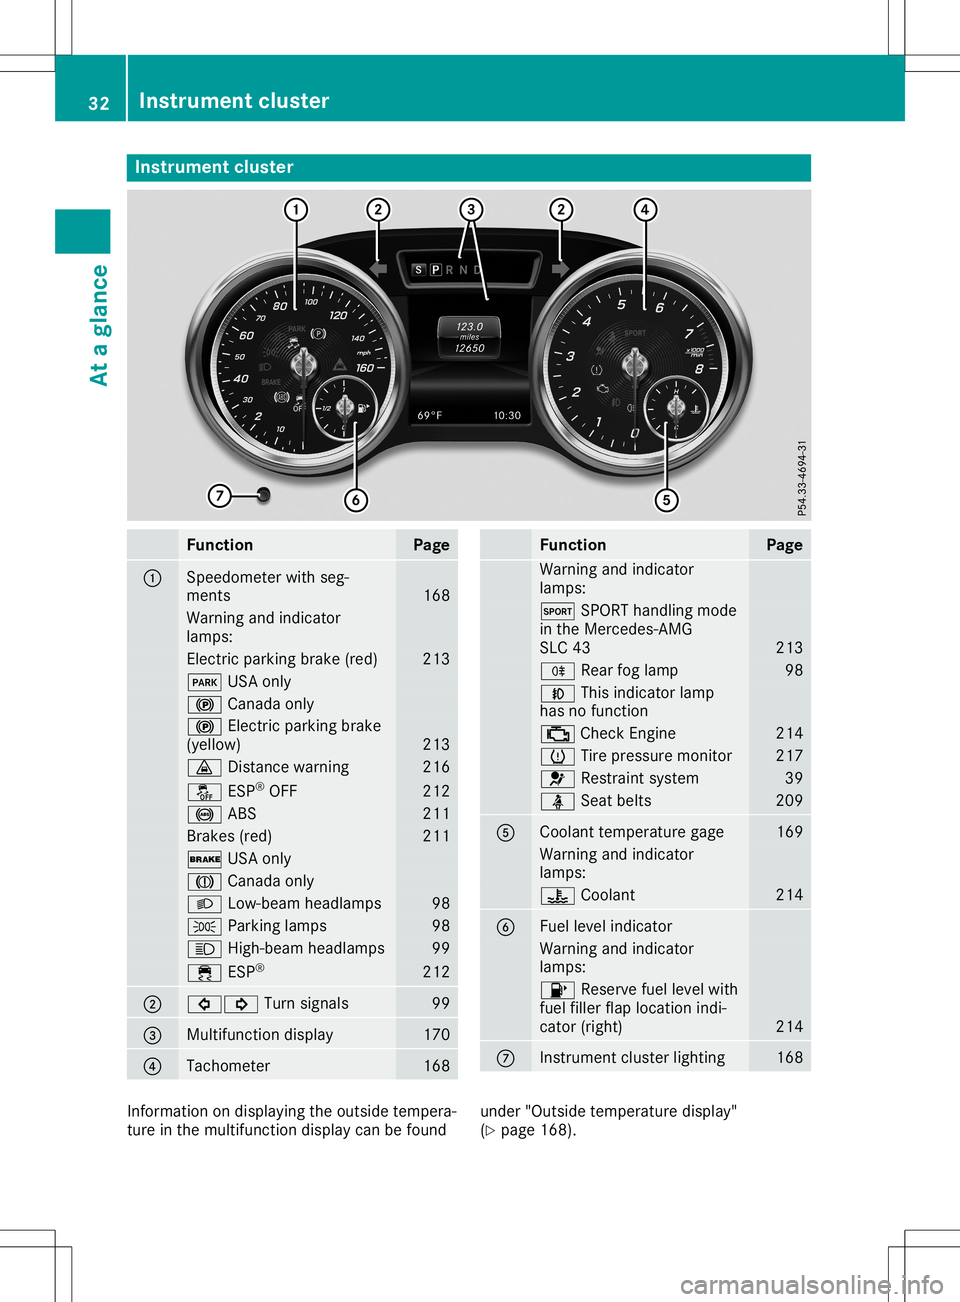 MERCEDES-BENZ SLC ROADSTER 2020  Owners Manual Inst
rumen tclus ter Funct
ion Pag
e 0043
Sp
eedo meterwit hseg-
men ts 16
8 Warn
ingand indicat or
lamp s: El
ec tric park ingbrak e(red) 21
3 0049
USAo nly 0024
Canad aonly 0024
Elec tric park ingbr